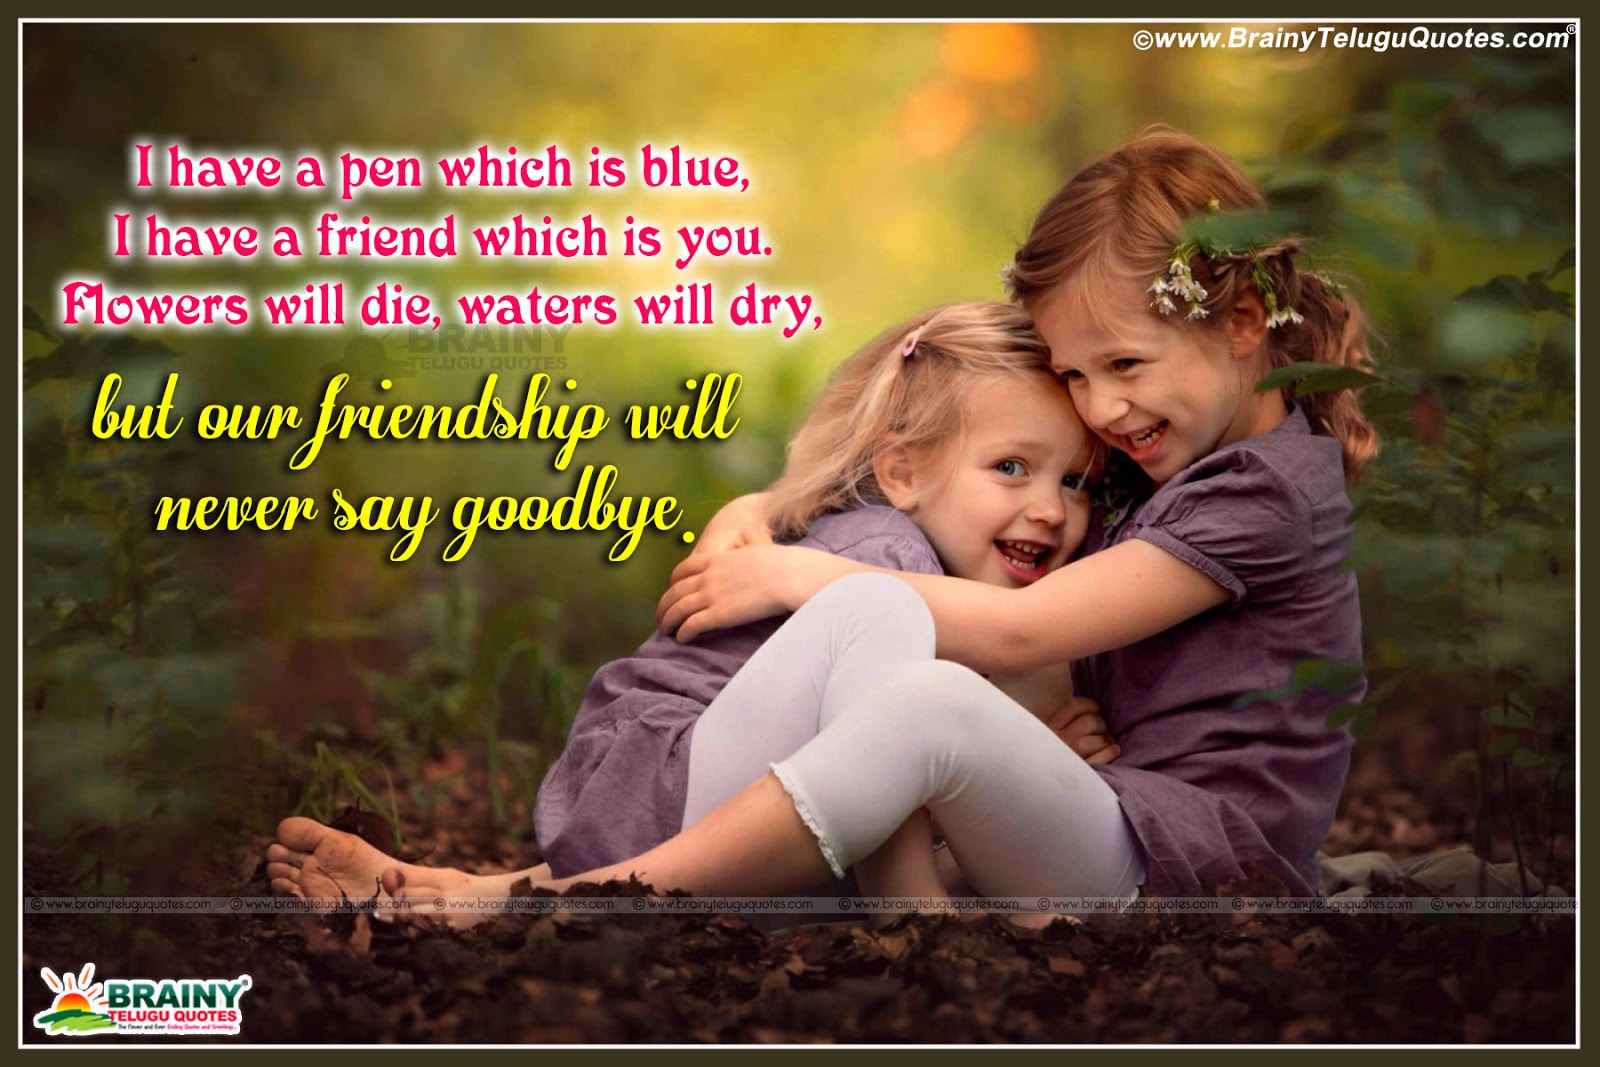 Inspirqational Good Friendship  Quotations  in English  with 